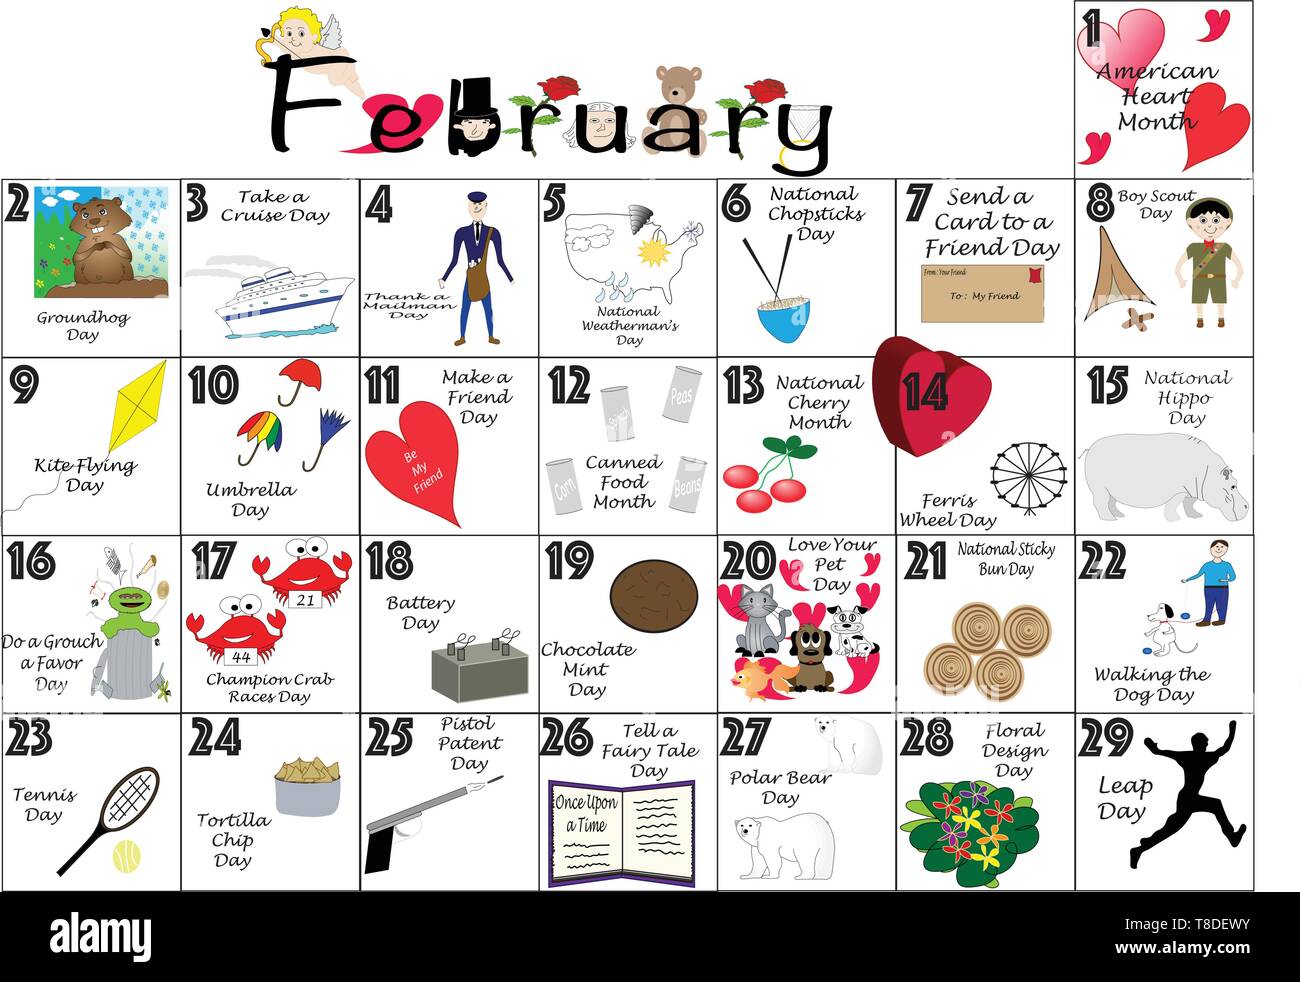 February 2020 calendar illustrated with daily Quirky Holidays and